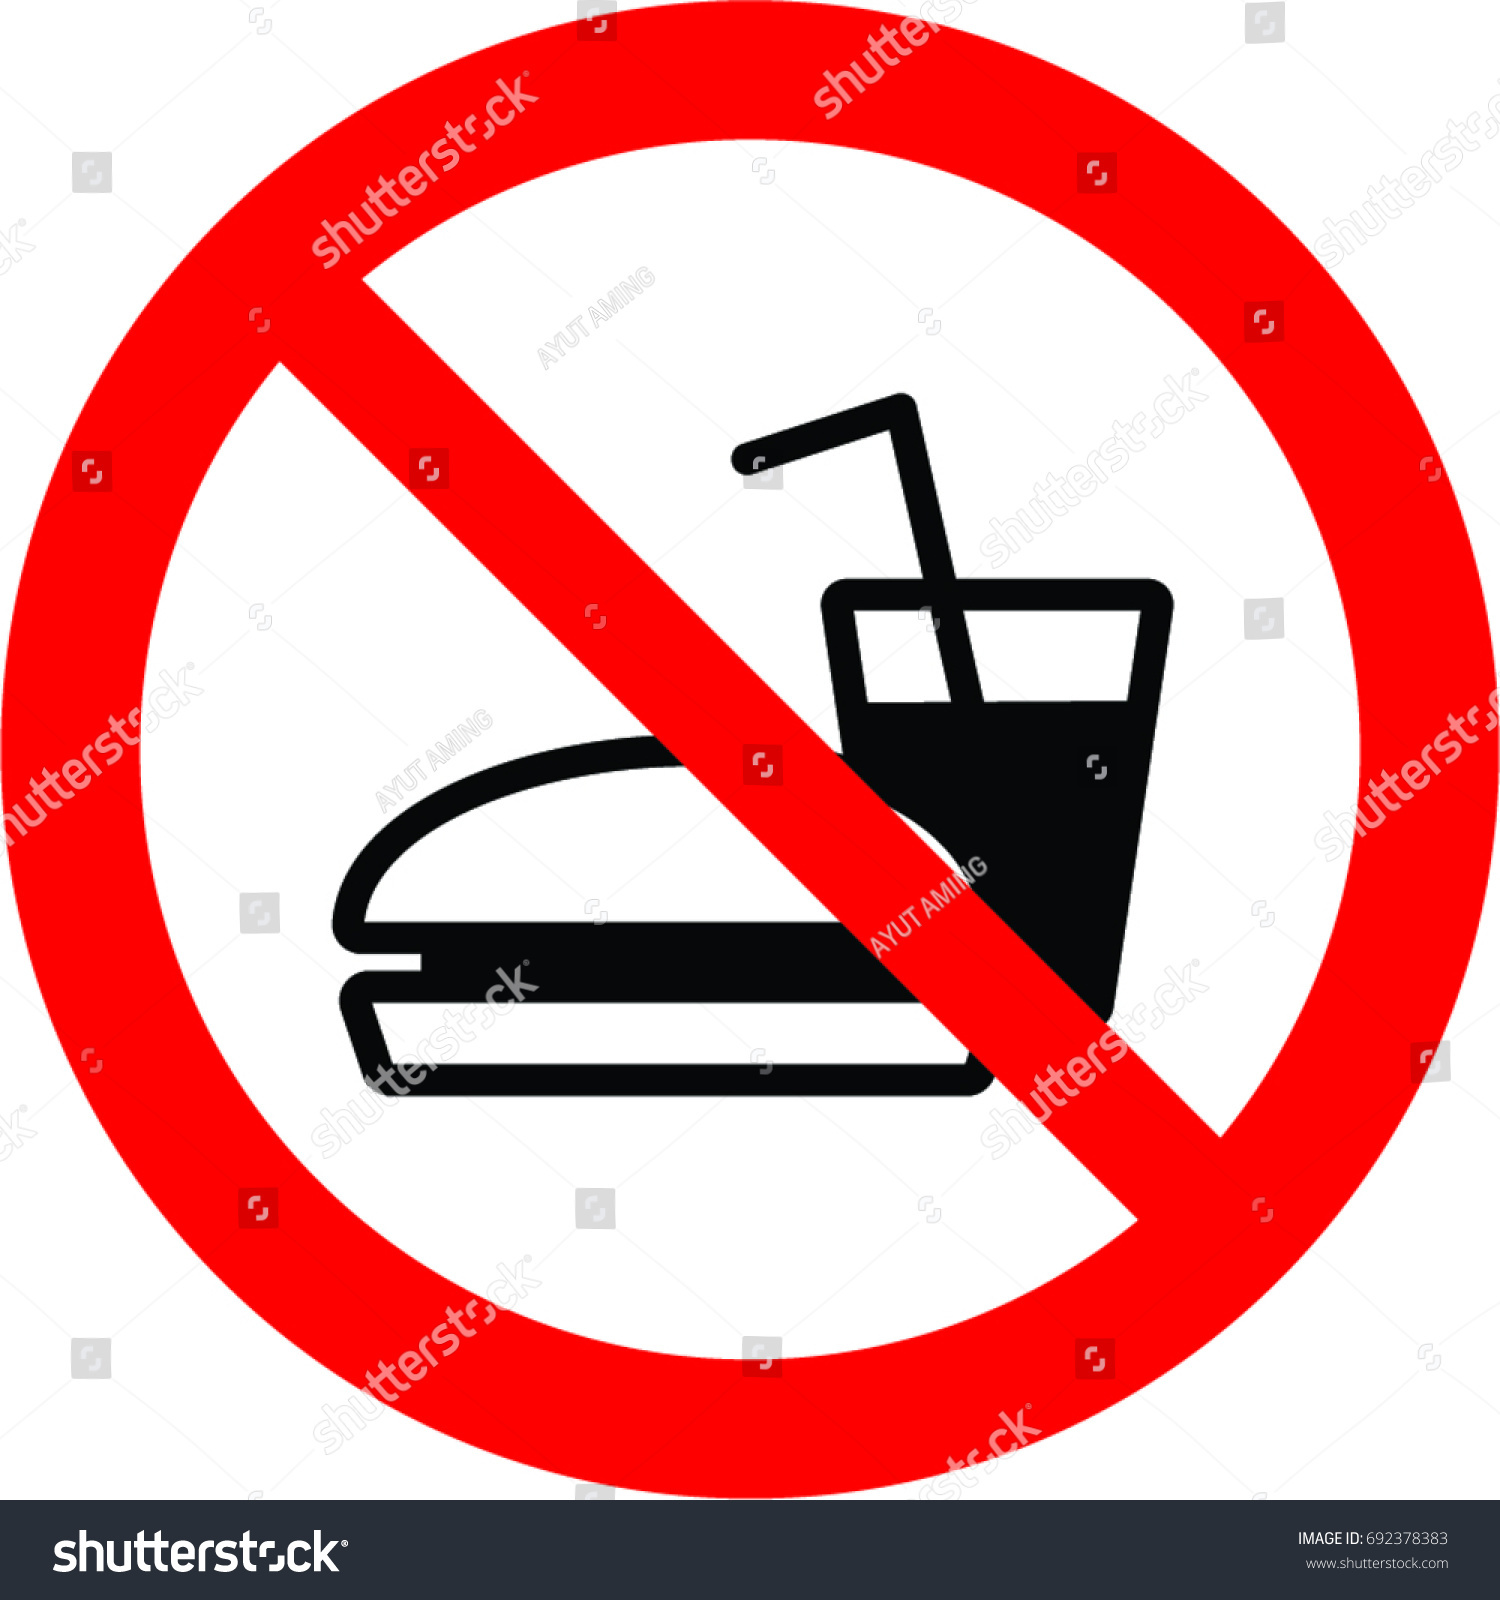 No Eating Drinking Stock Vector (Royalty Free) 692378383 | Shutterstock